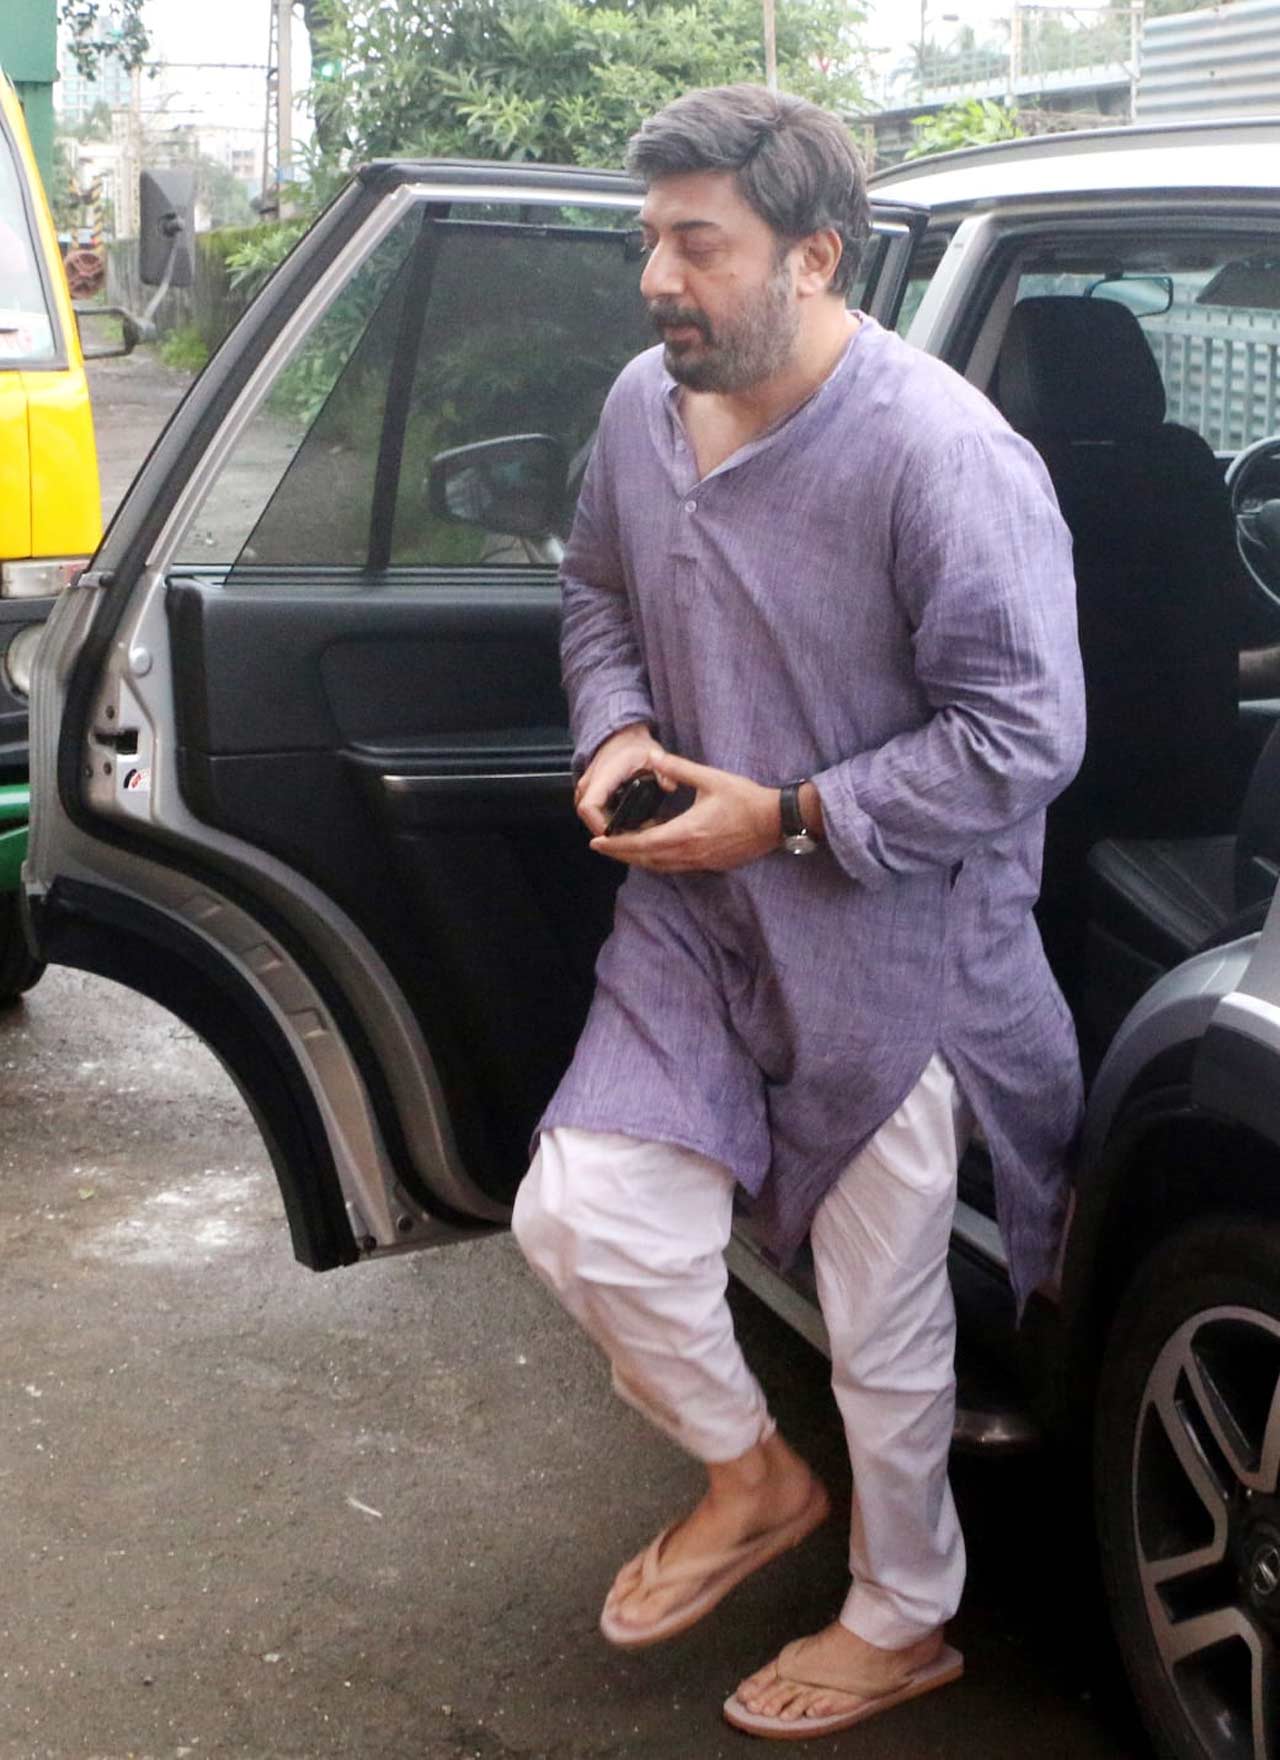 Popular South superstar Arvind Swamy was clicked in his casual best in Bandra, Mumbai. Speaking about his professional commitments, the actor will be next seen in Naragasooran, Kallapart, Sathuranga Vettai 2, Vanangamudi, Rendagam and Pulanaivu.